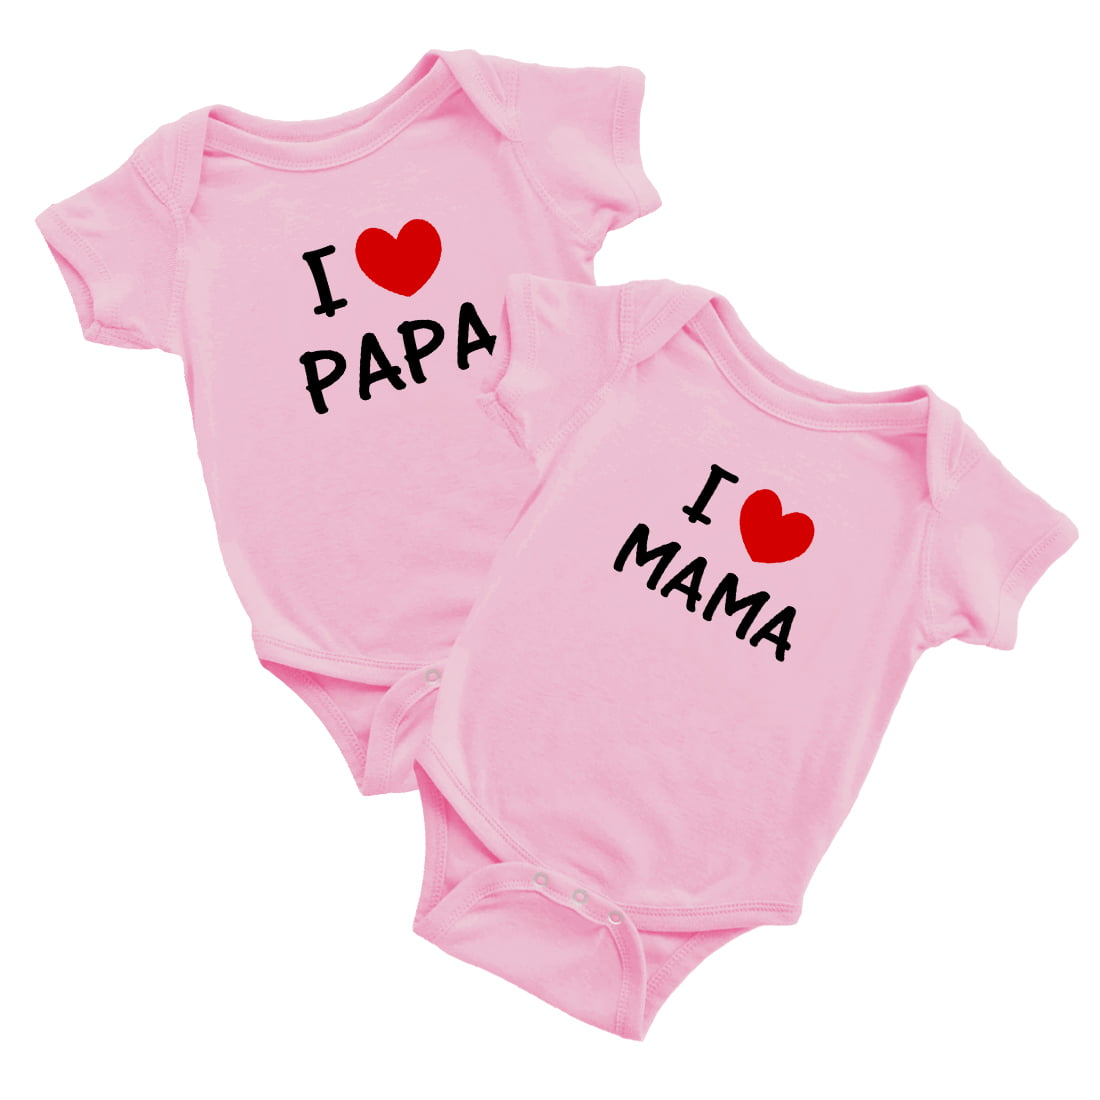 I Love MAMA PAPA Twins Baby Clothes Jumpsuit Bodysuit (Pink, 0-3M)